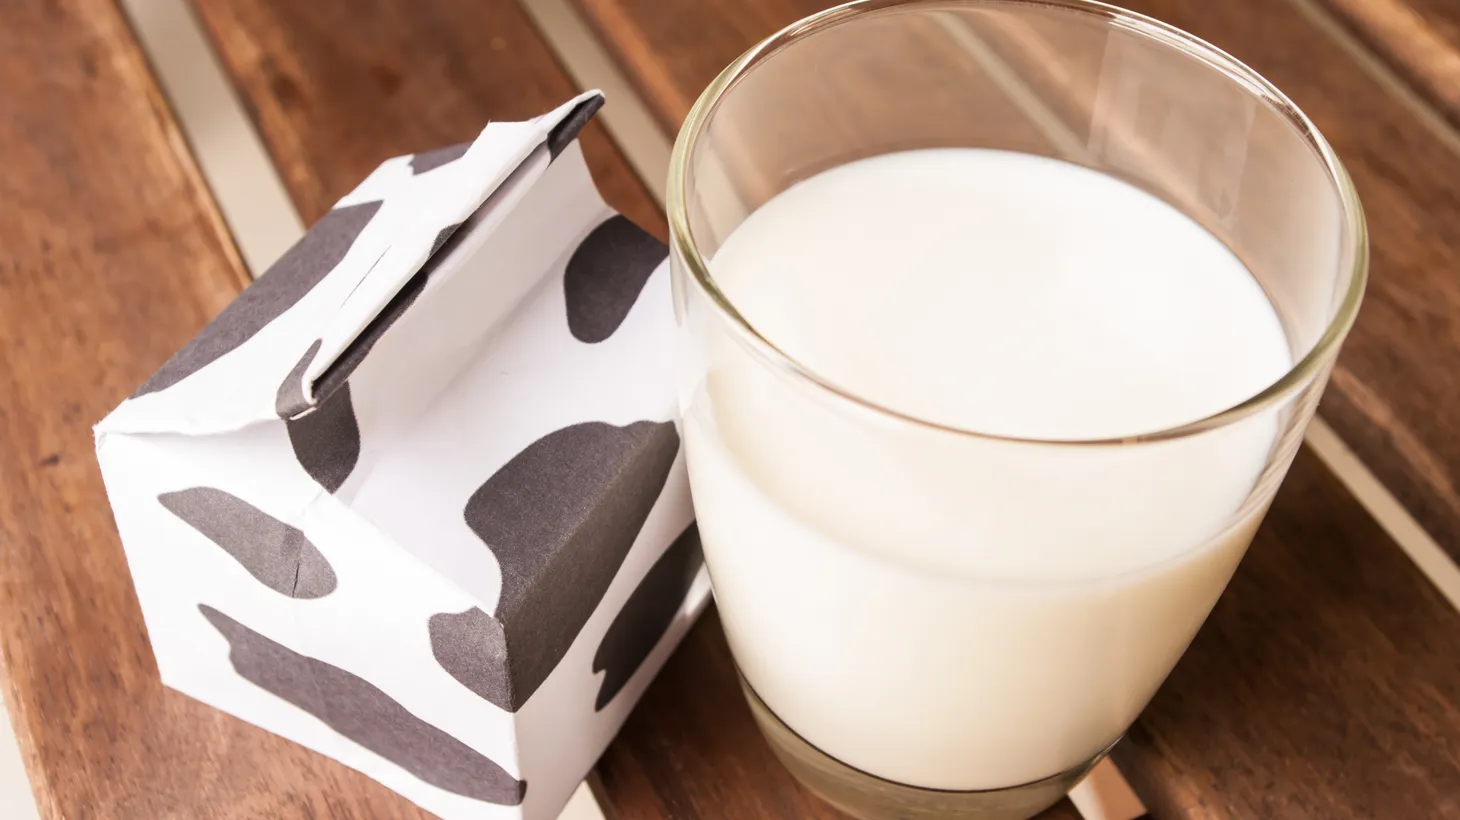 “These are kids who grew up drinking Obama-era school milk, which means it was no fat or low fat. And flavored milk was eliminated for a short period of time in school lunches. So kids got exposed to milk that they weren't drinking at home. It had this gross, warm, no fat milk,” says New York Times food correspondent Kim Severson.